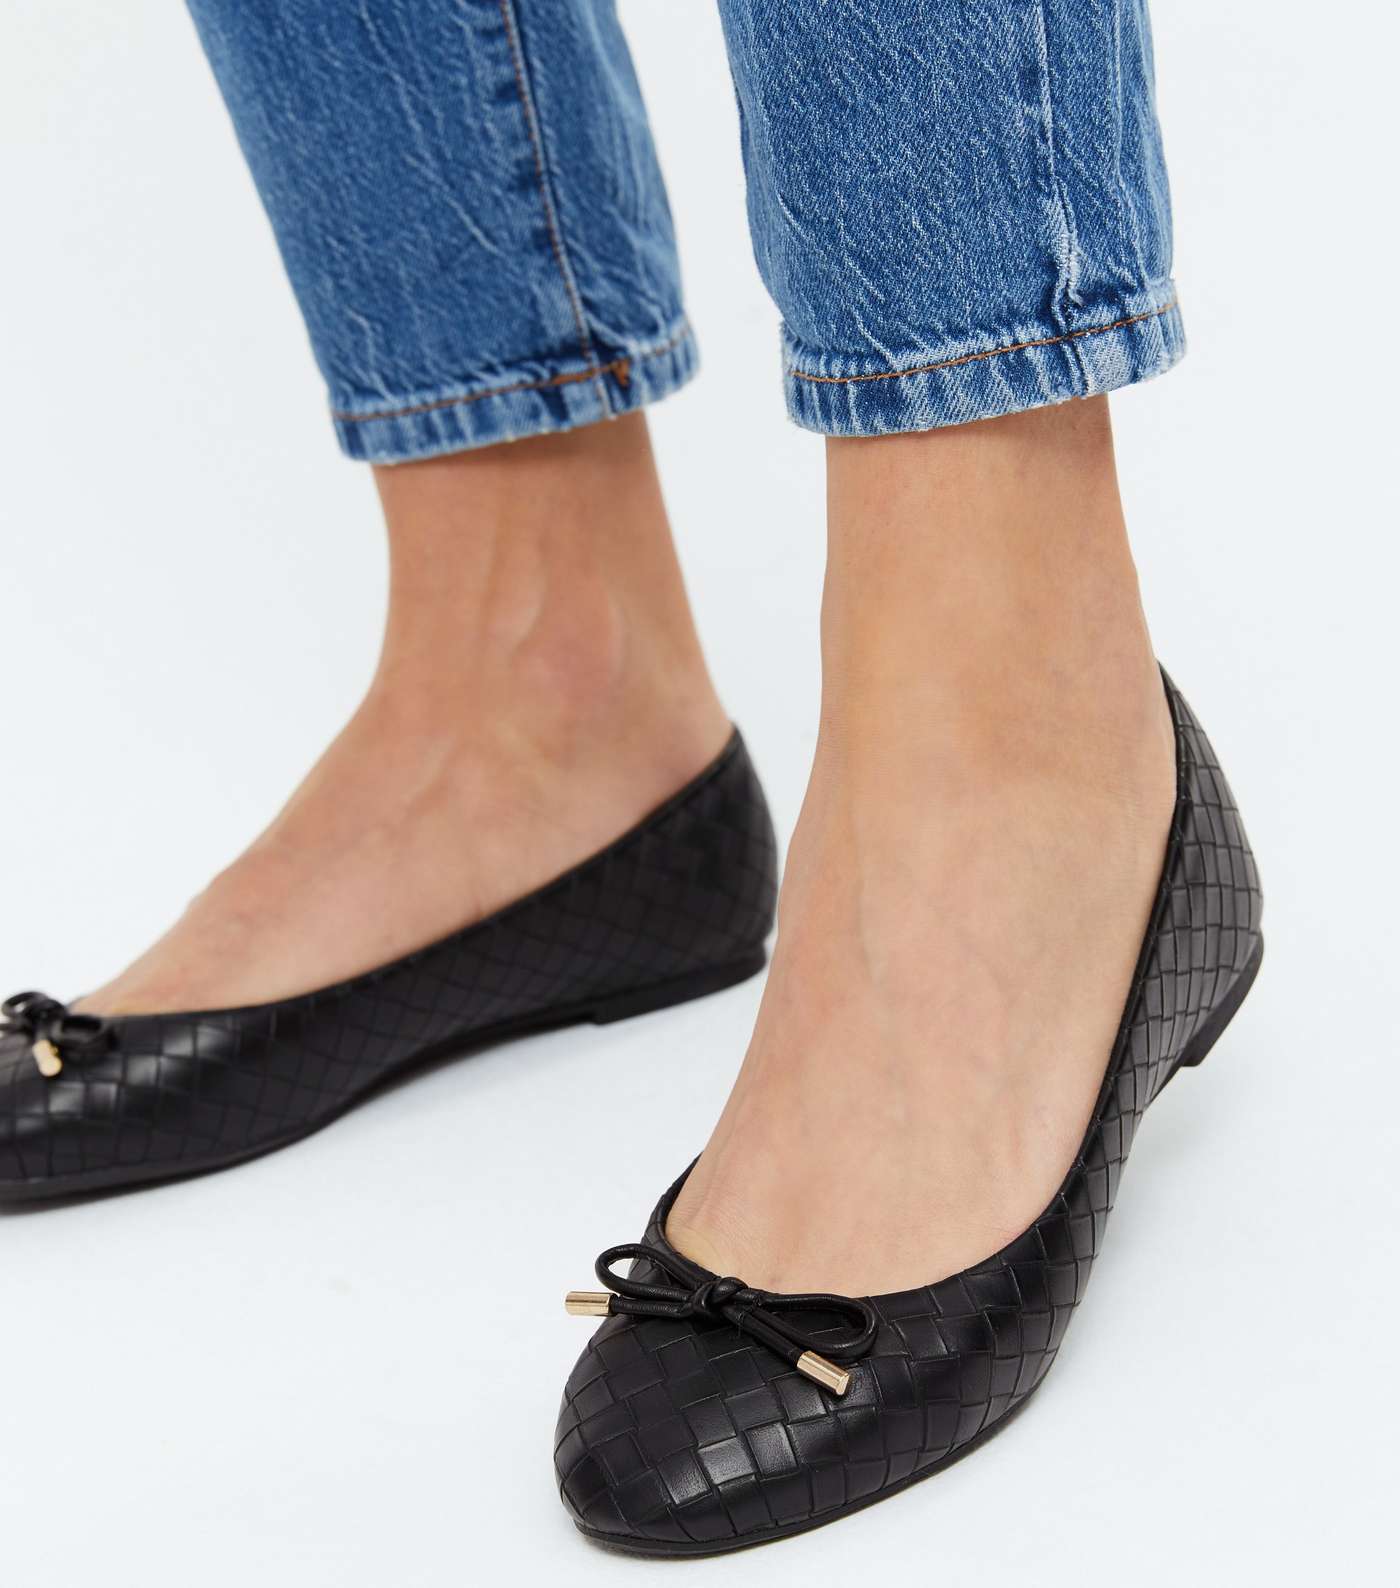 Black Woven Leather-Look Bow Ballet Pumps Image 2